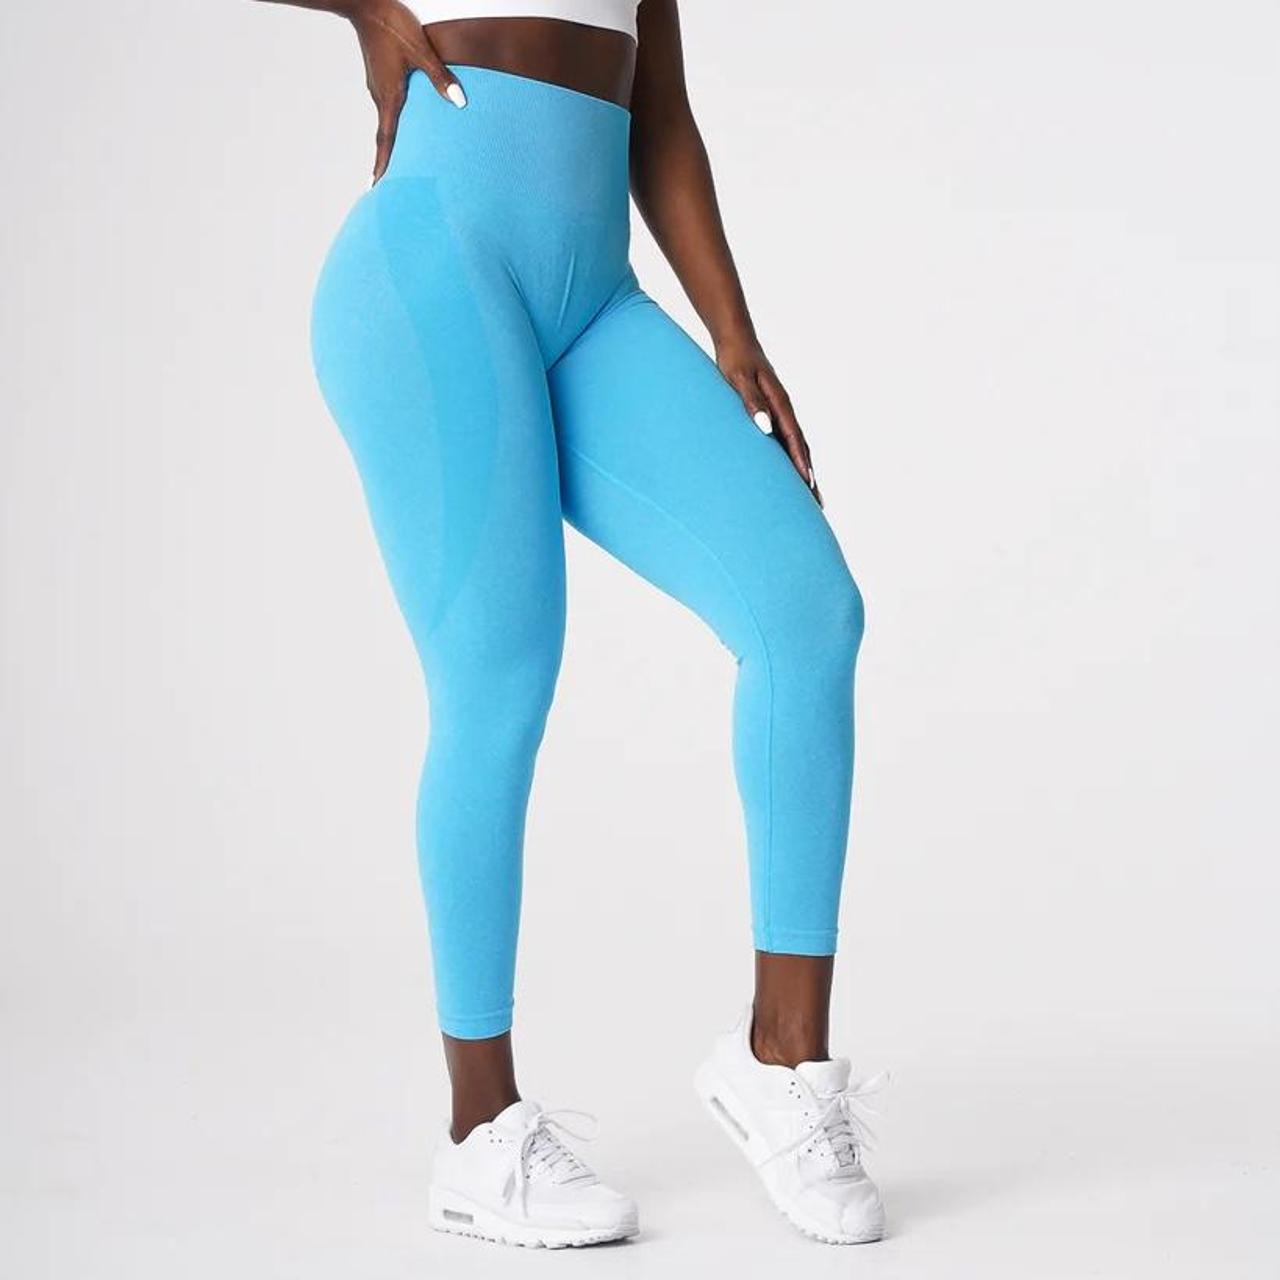 Stretchy Seamless Yoga Seamless Gym Leggings For Women Curve Contour  Design, Perfect For Gym, Workouts, Fitness And Sports NVGTN No. 230826 From  Shenping03, $9.16